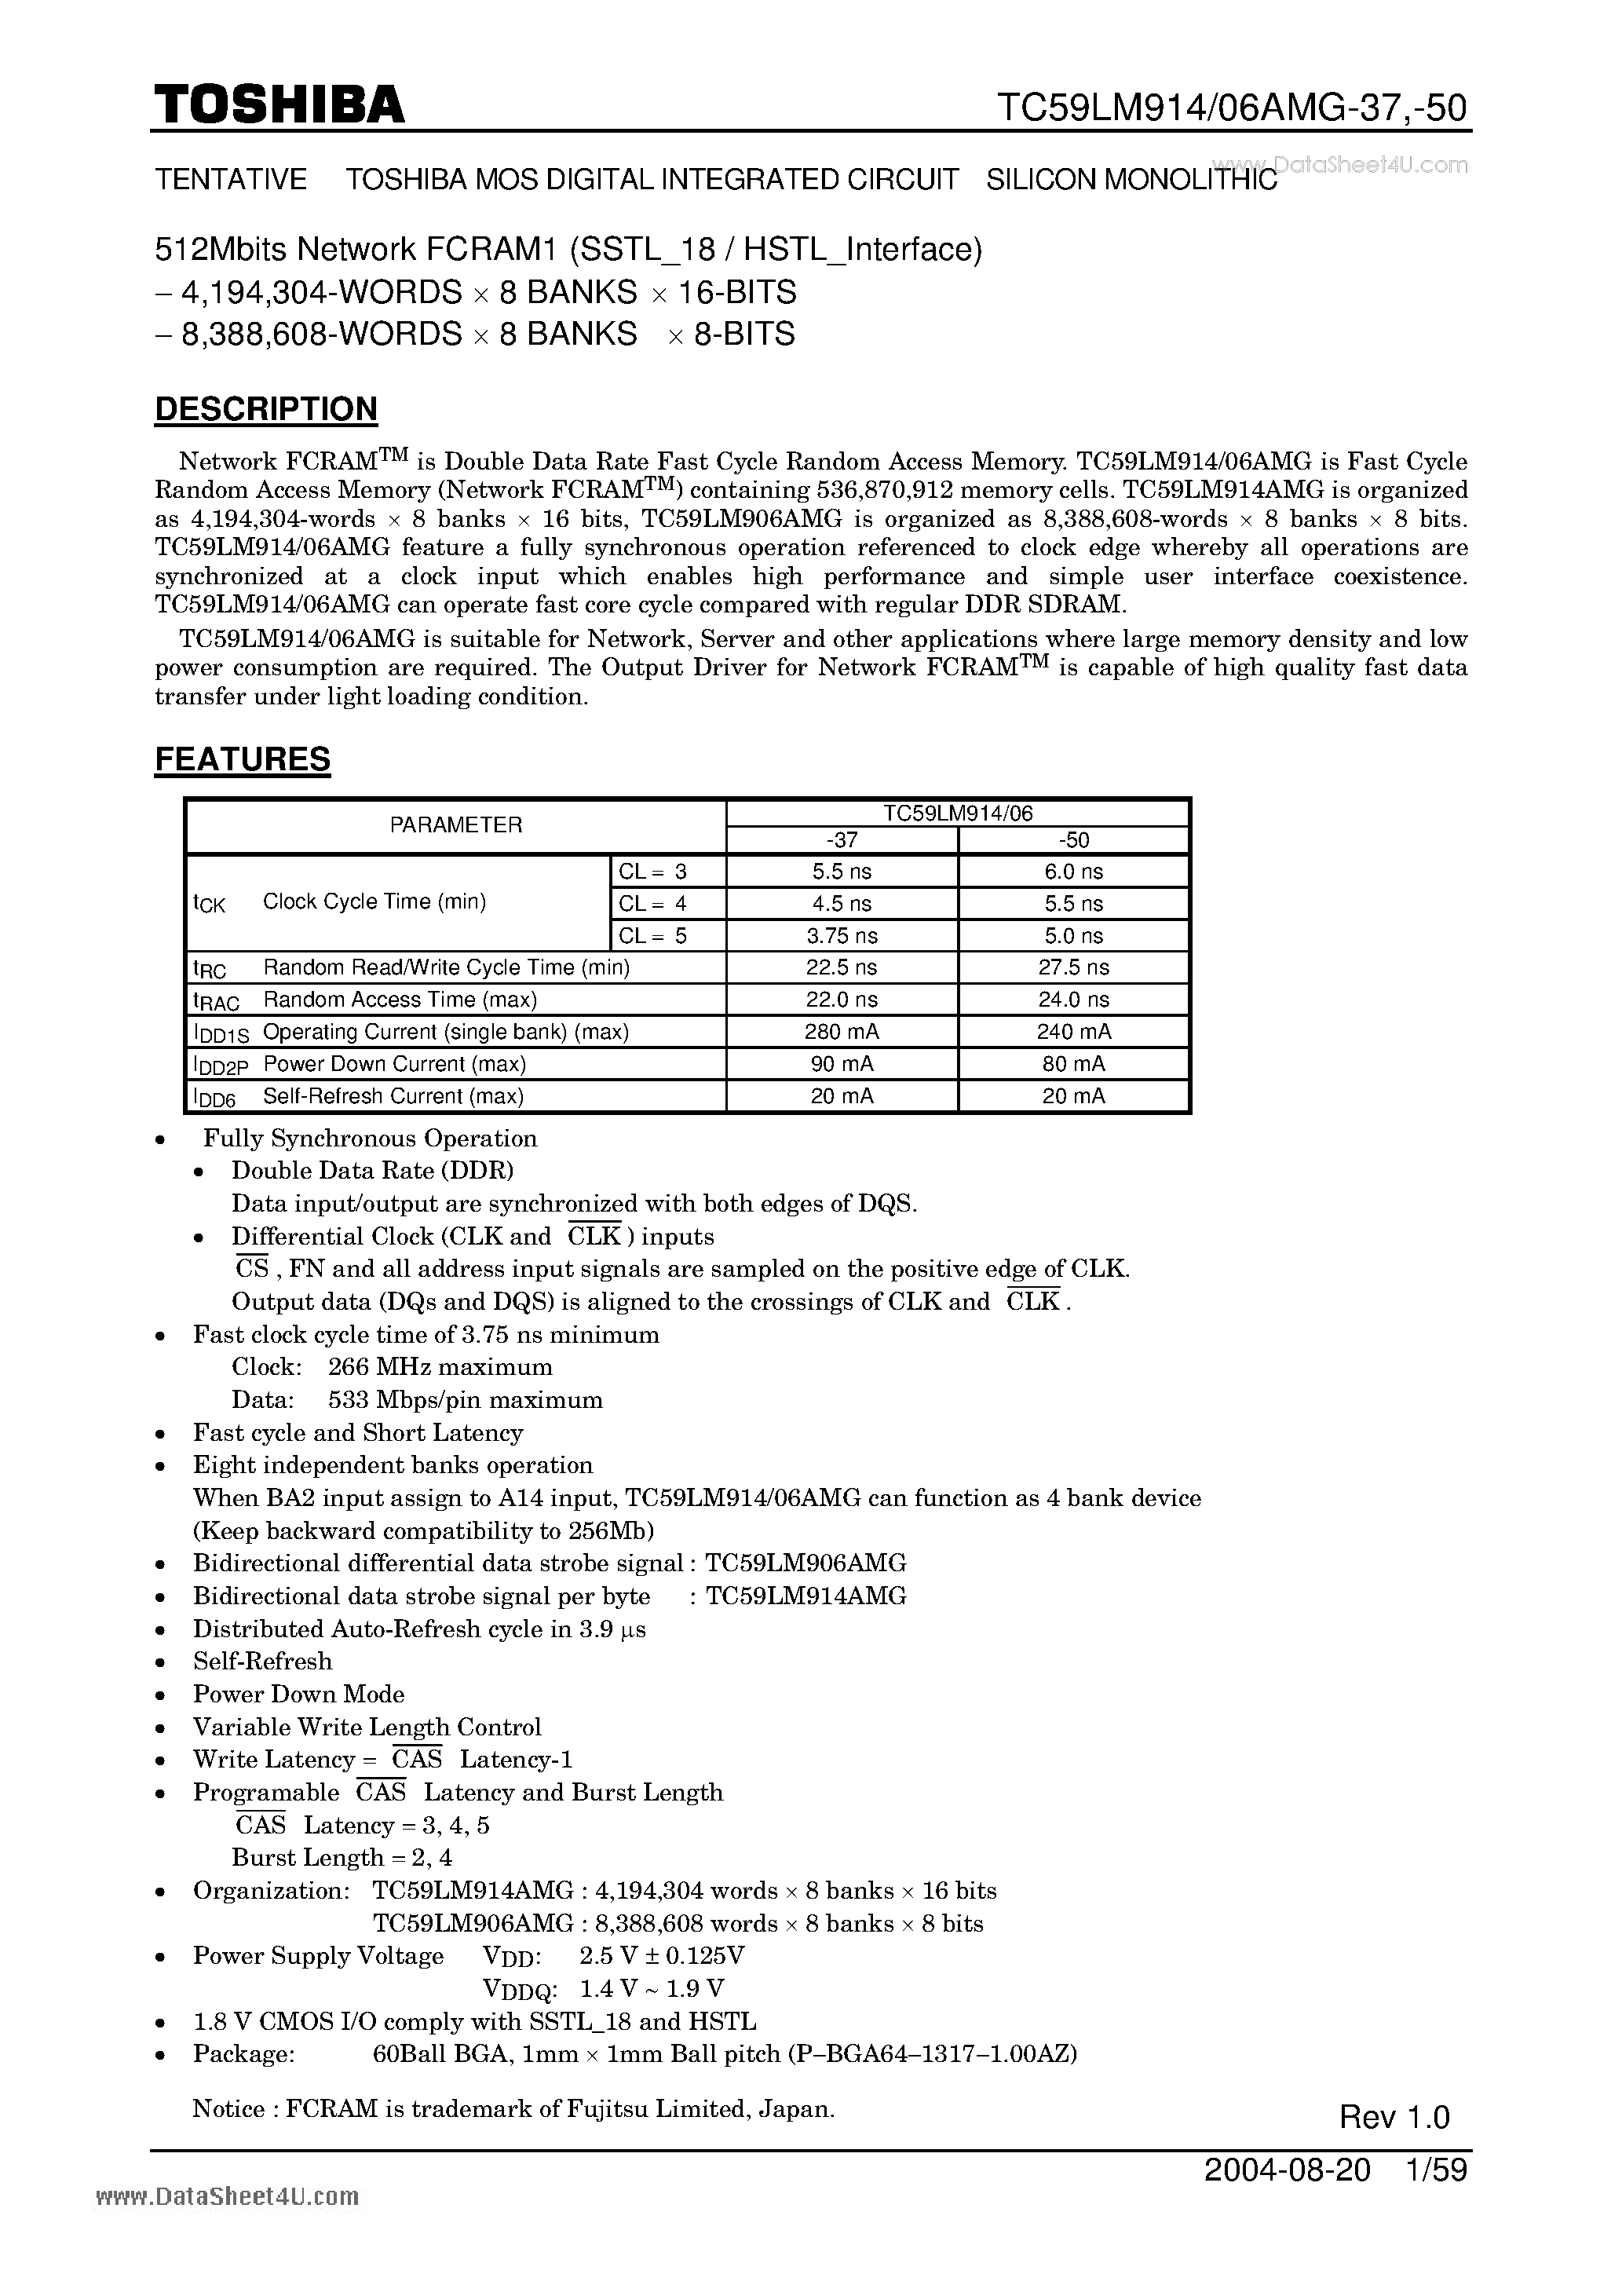 Datasheet TC59LM906AMG-37 - MOS DIGITAL INTEGRATED CIRCUIT SILICON MONOLITHIC page 1